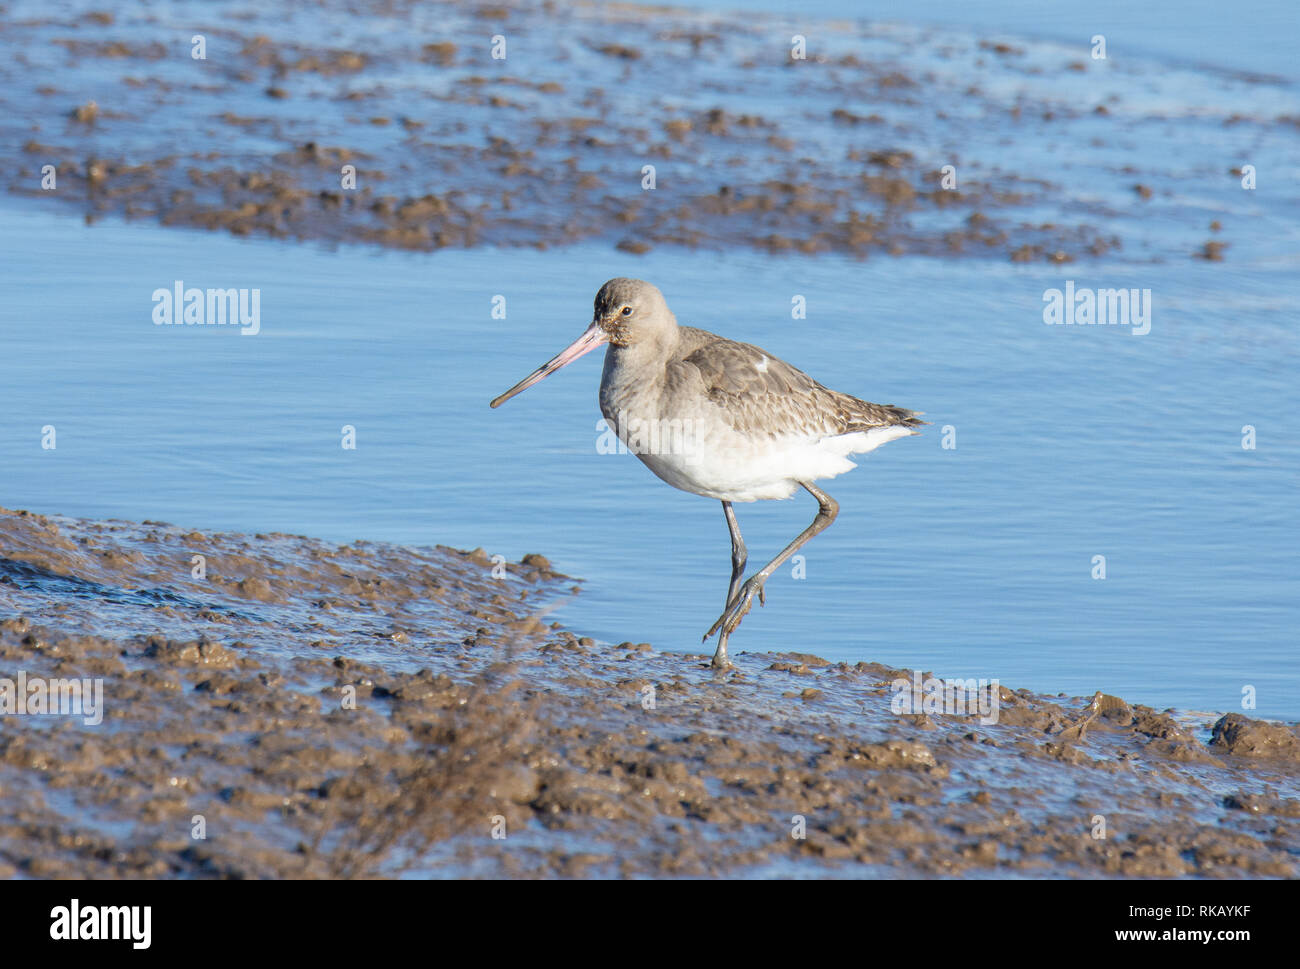 A Bar Tailed Godwit searching for food at RSPB Titchwell Marsh Stock Photo